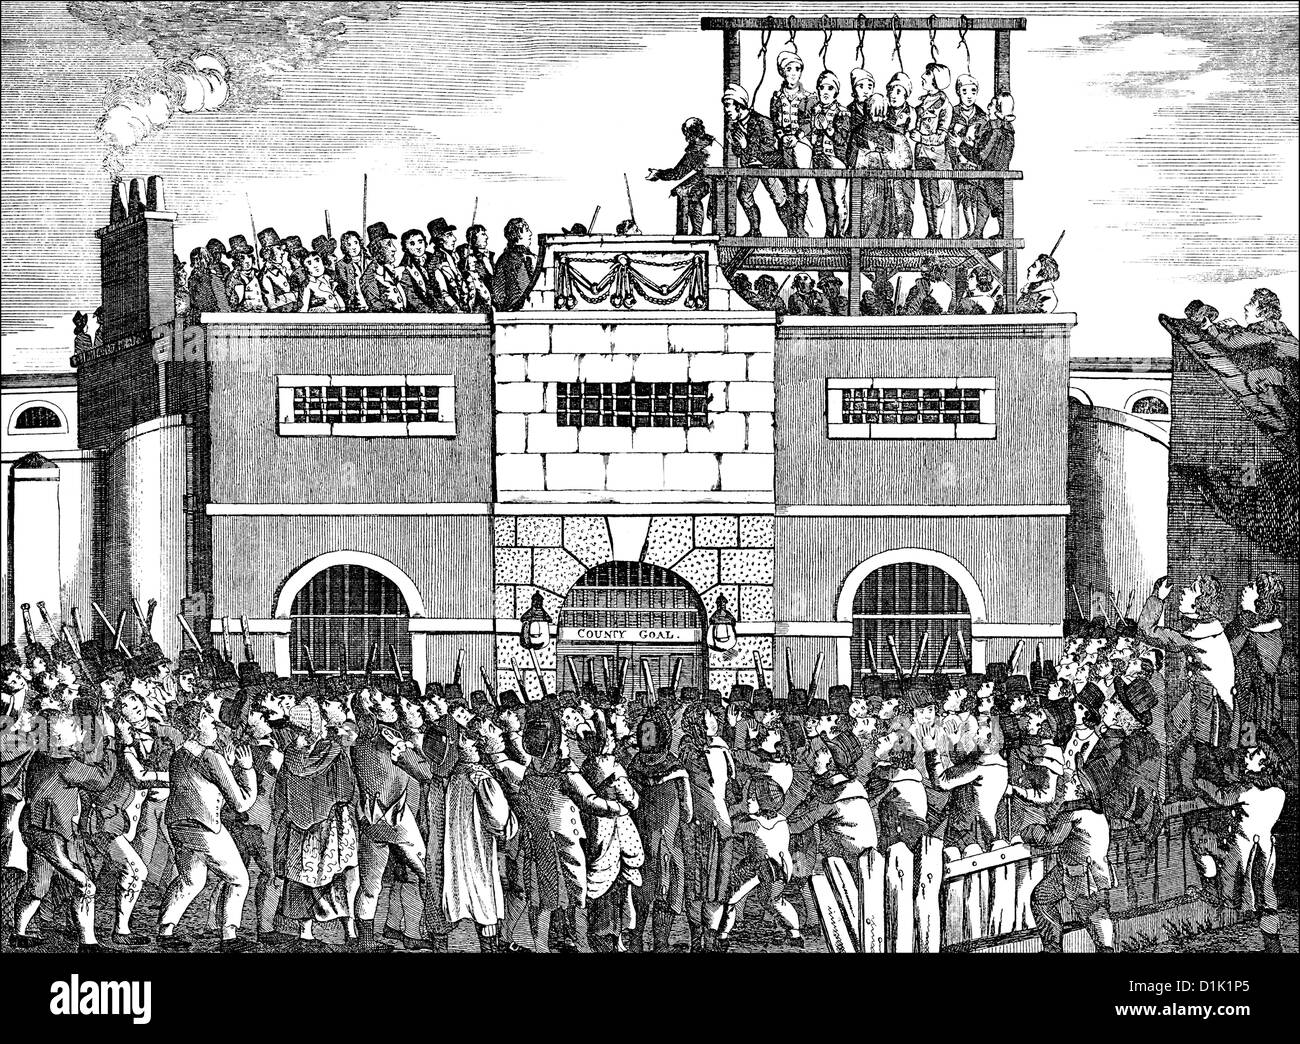 Public Execution By Hanging At The End Of The 18th Century